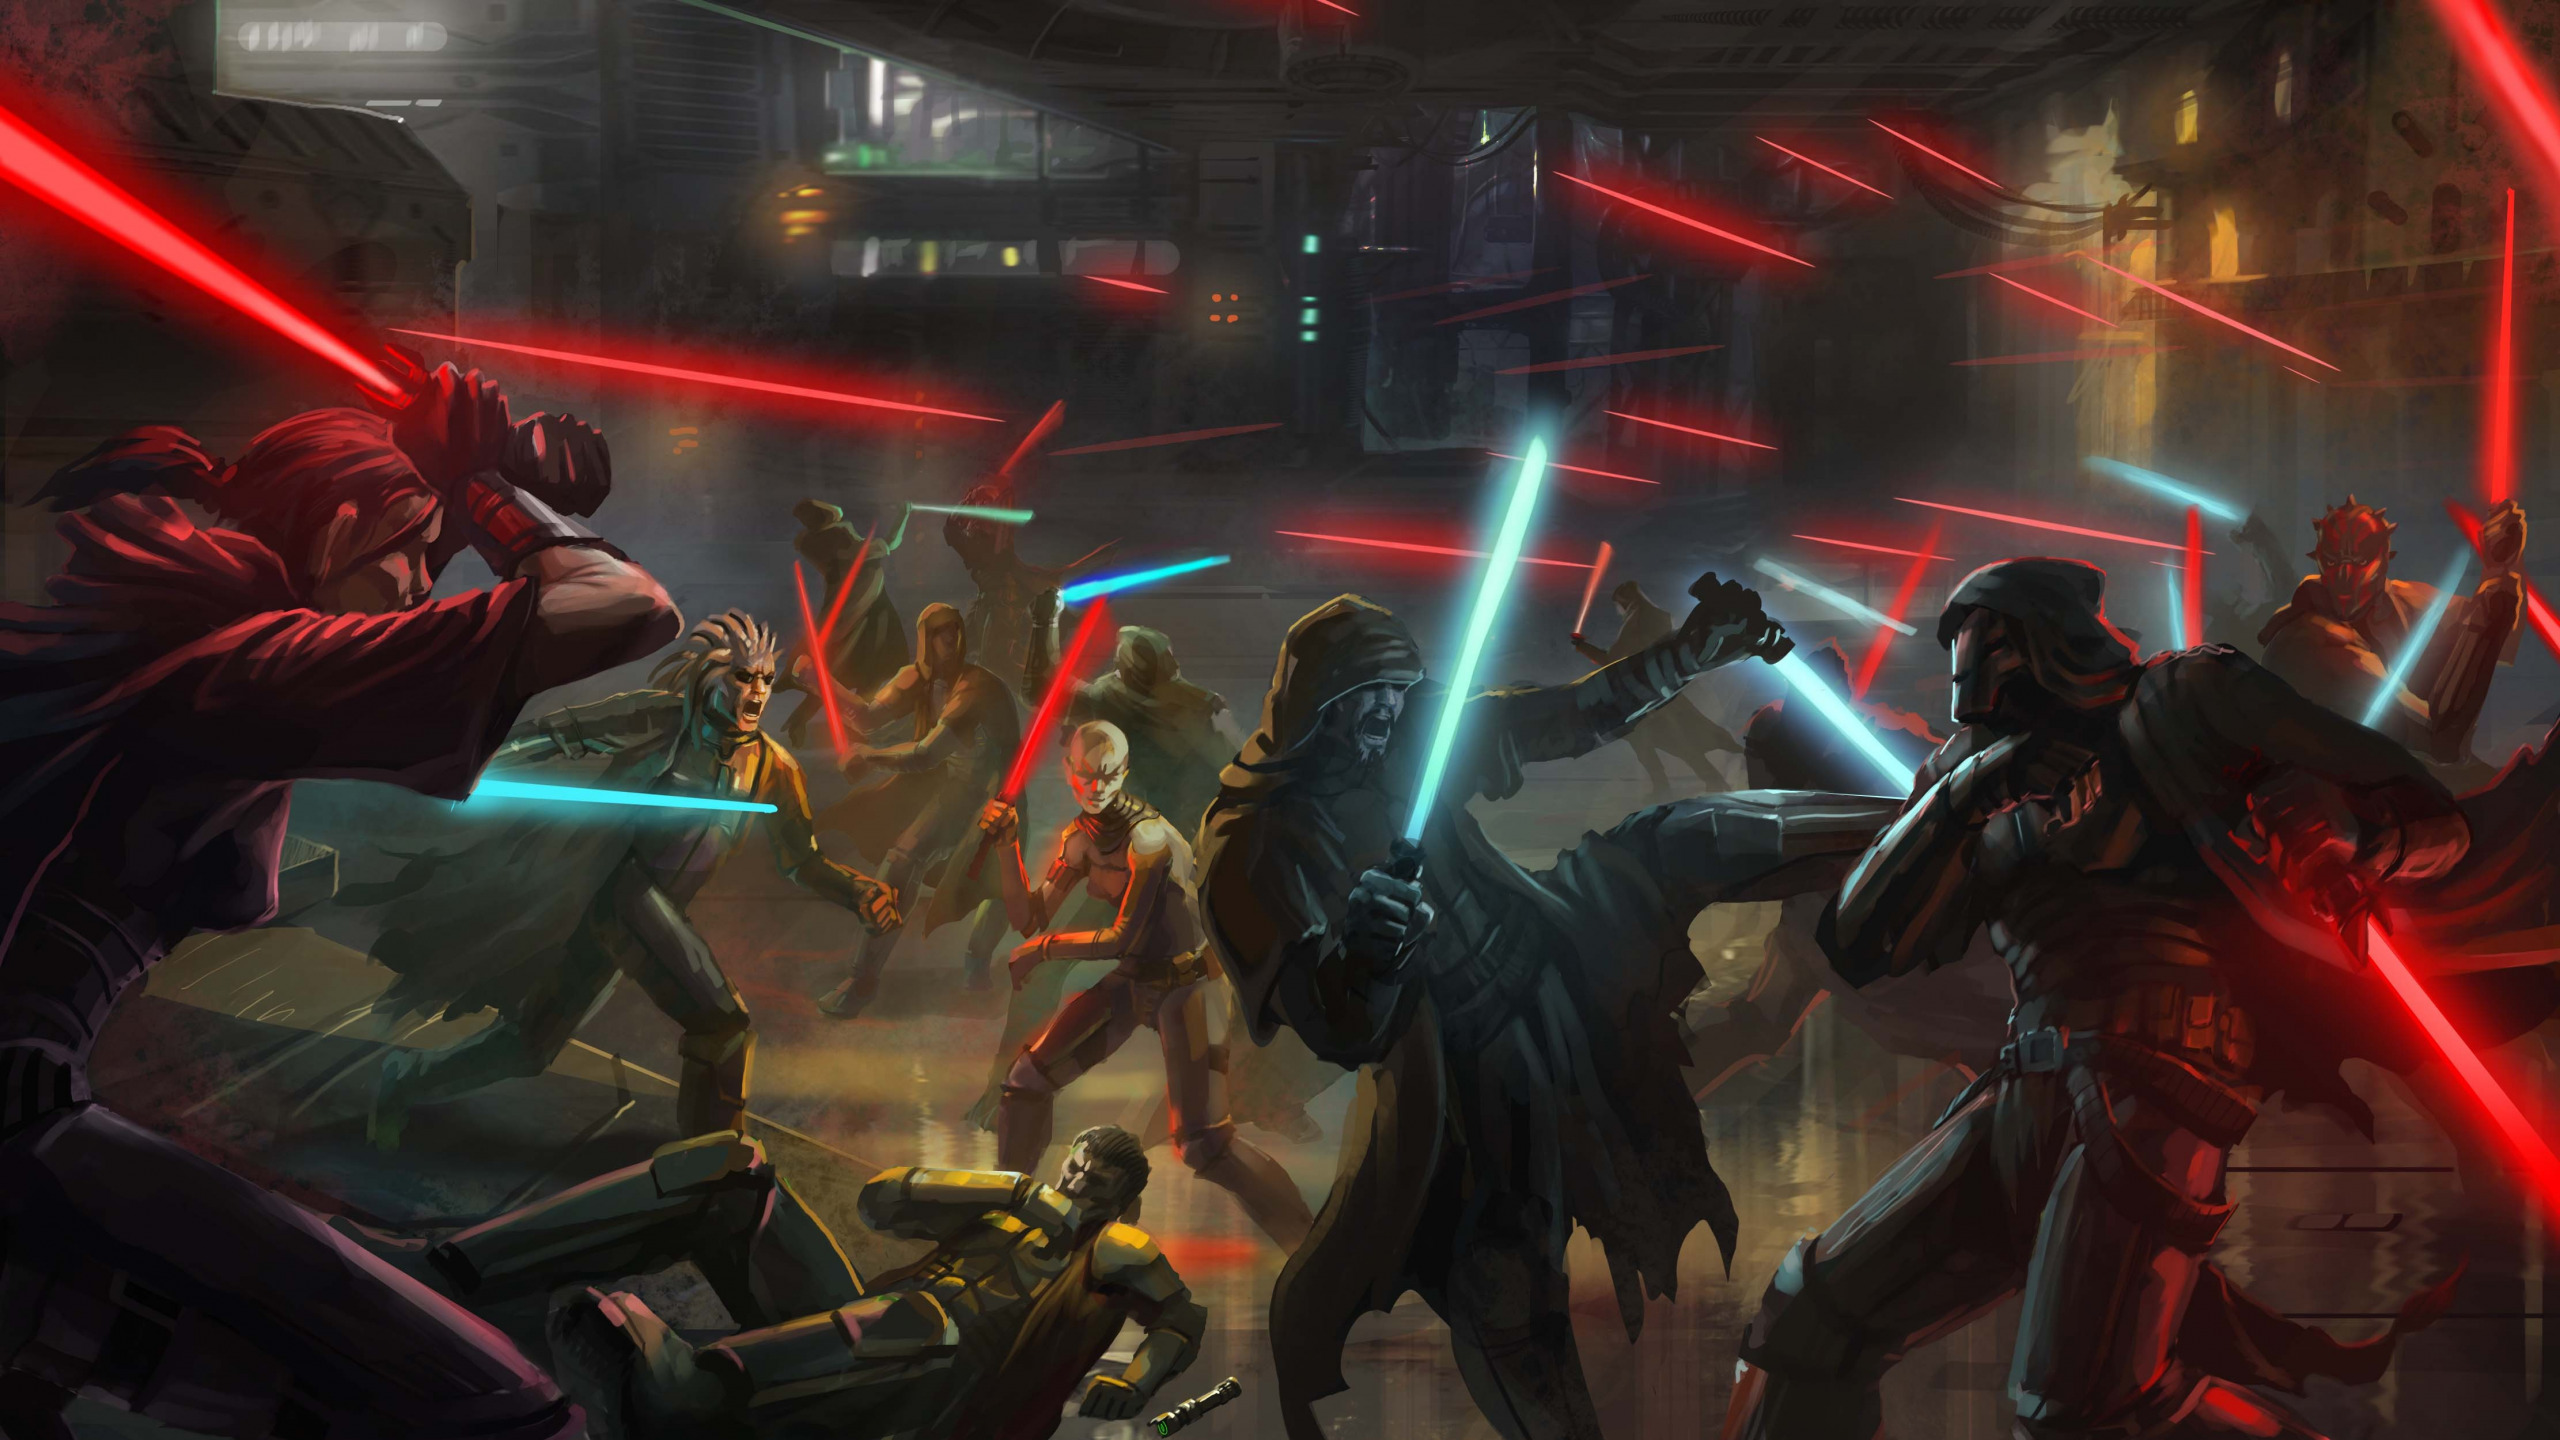 Download wallpaper art, star wars, star wars, the Jedi, the old republic, Sith, section games in resolution 2560x1440